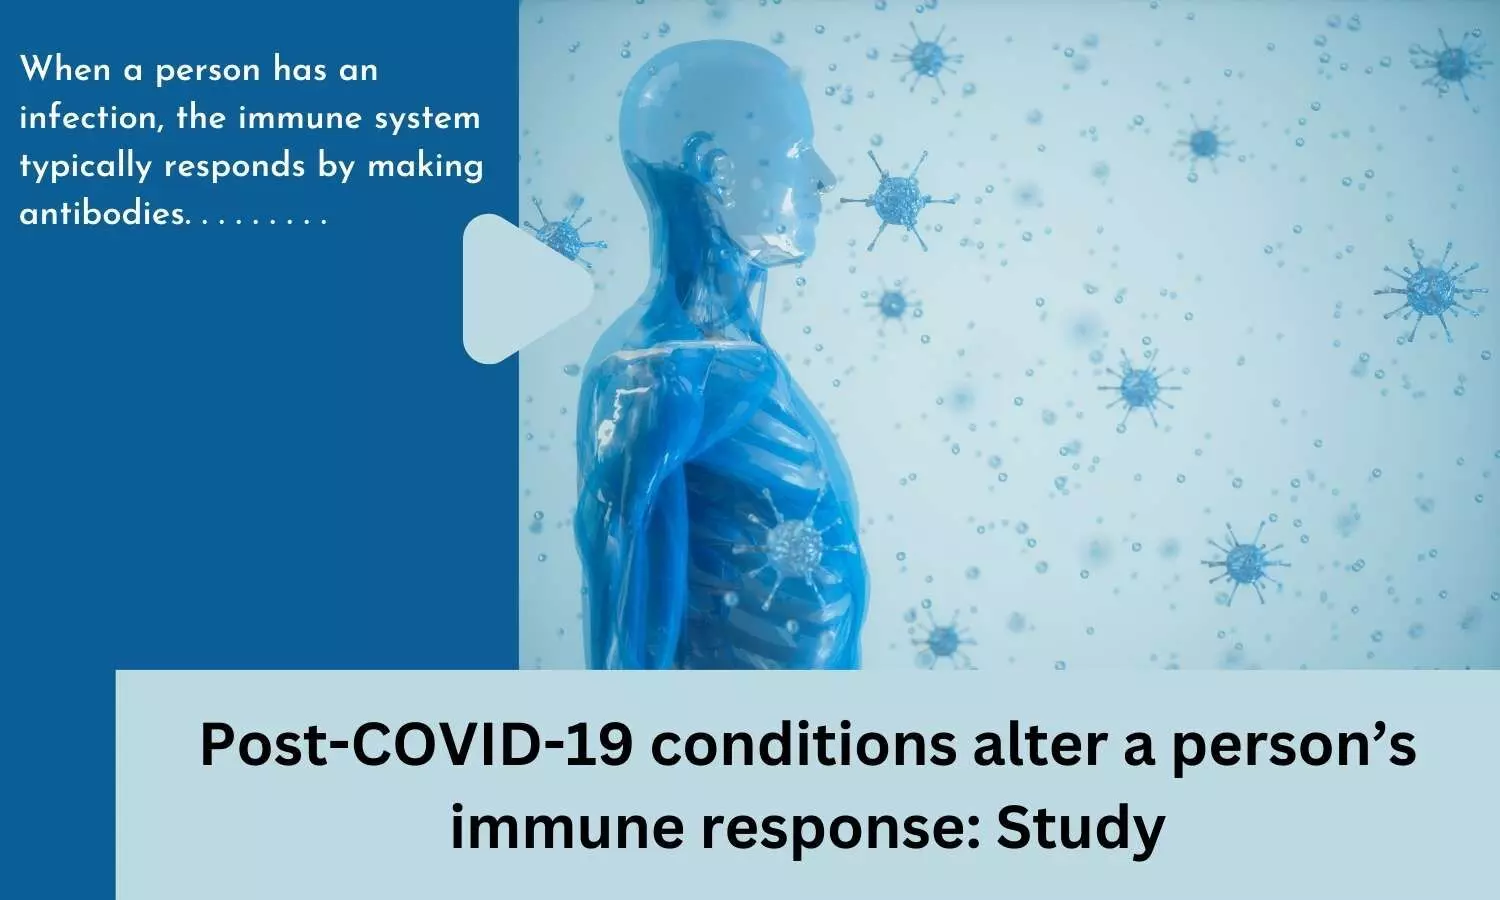 Post-COVID-19 conditions alter a persons immune response: Study